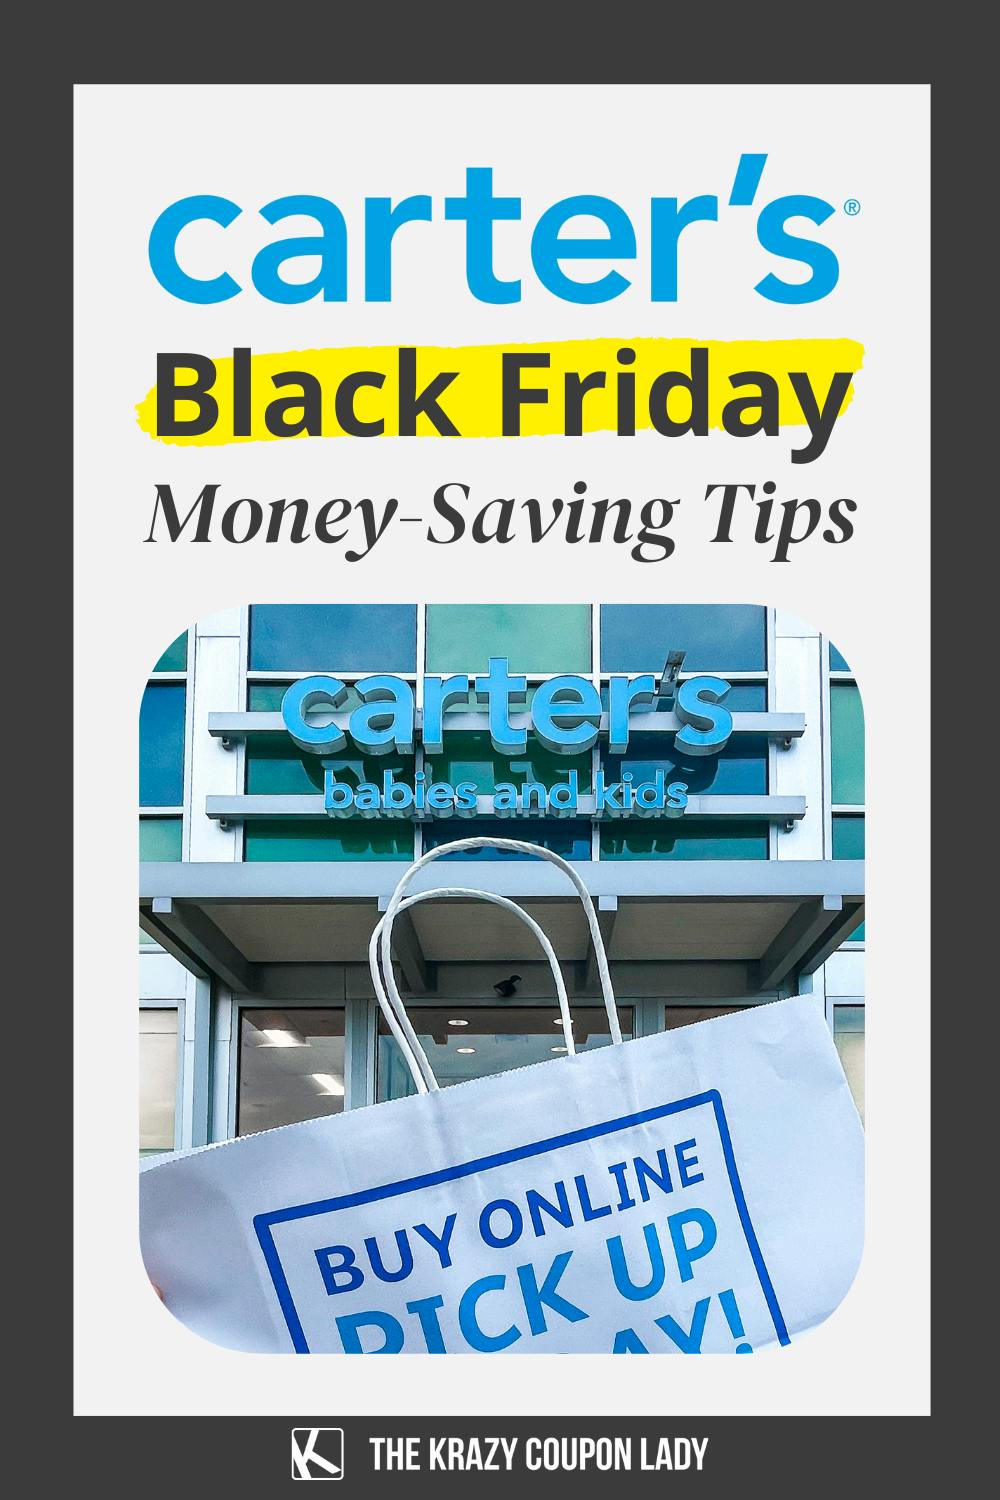 Carter's Black Friday Tips and Tricks